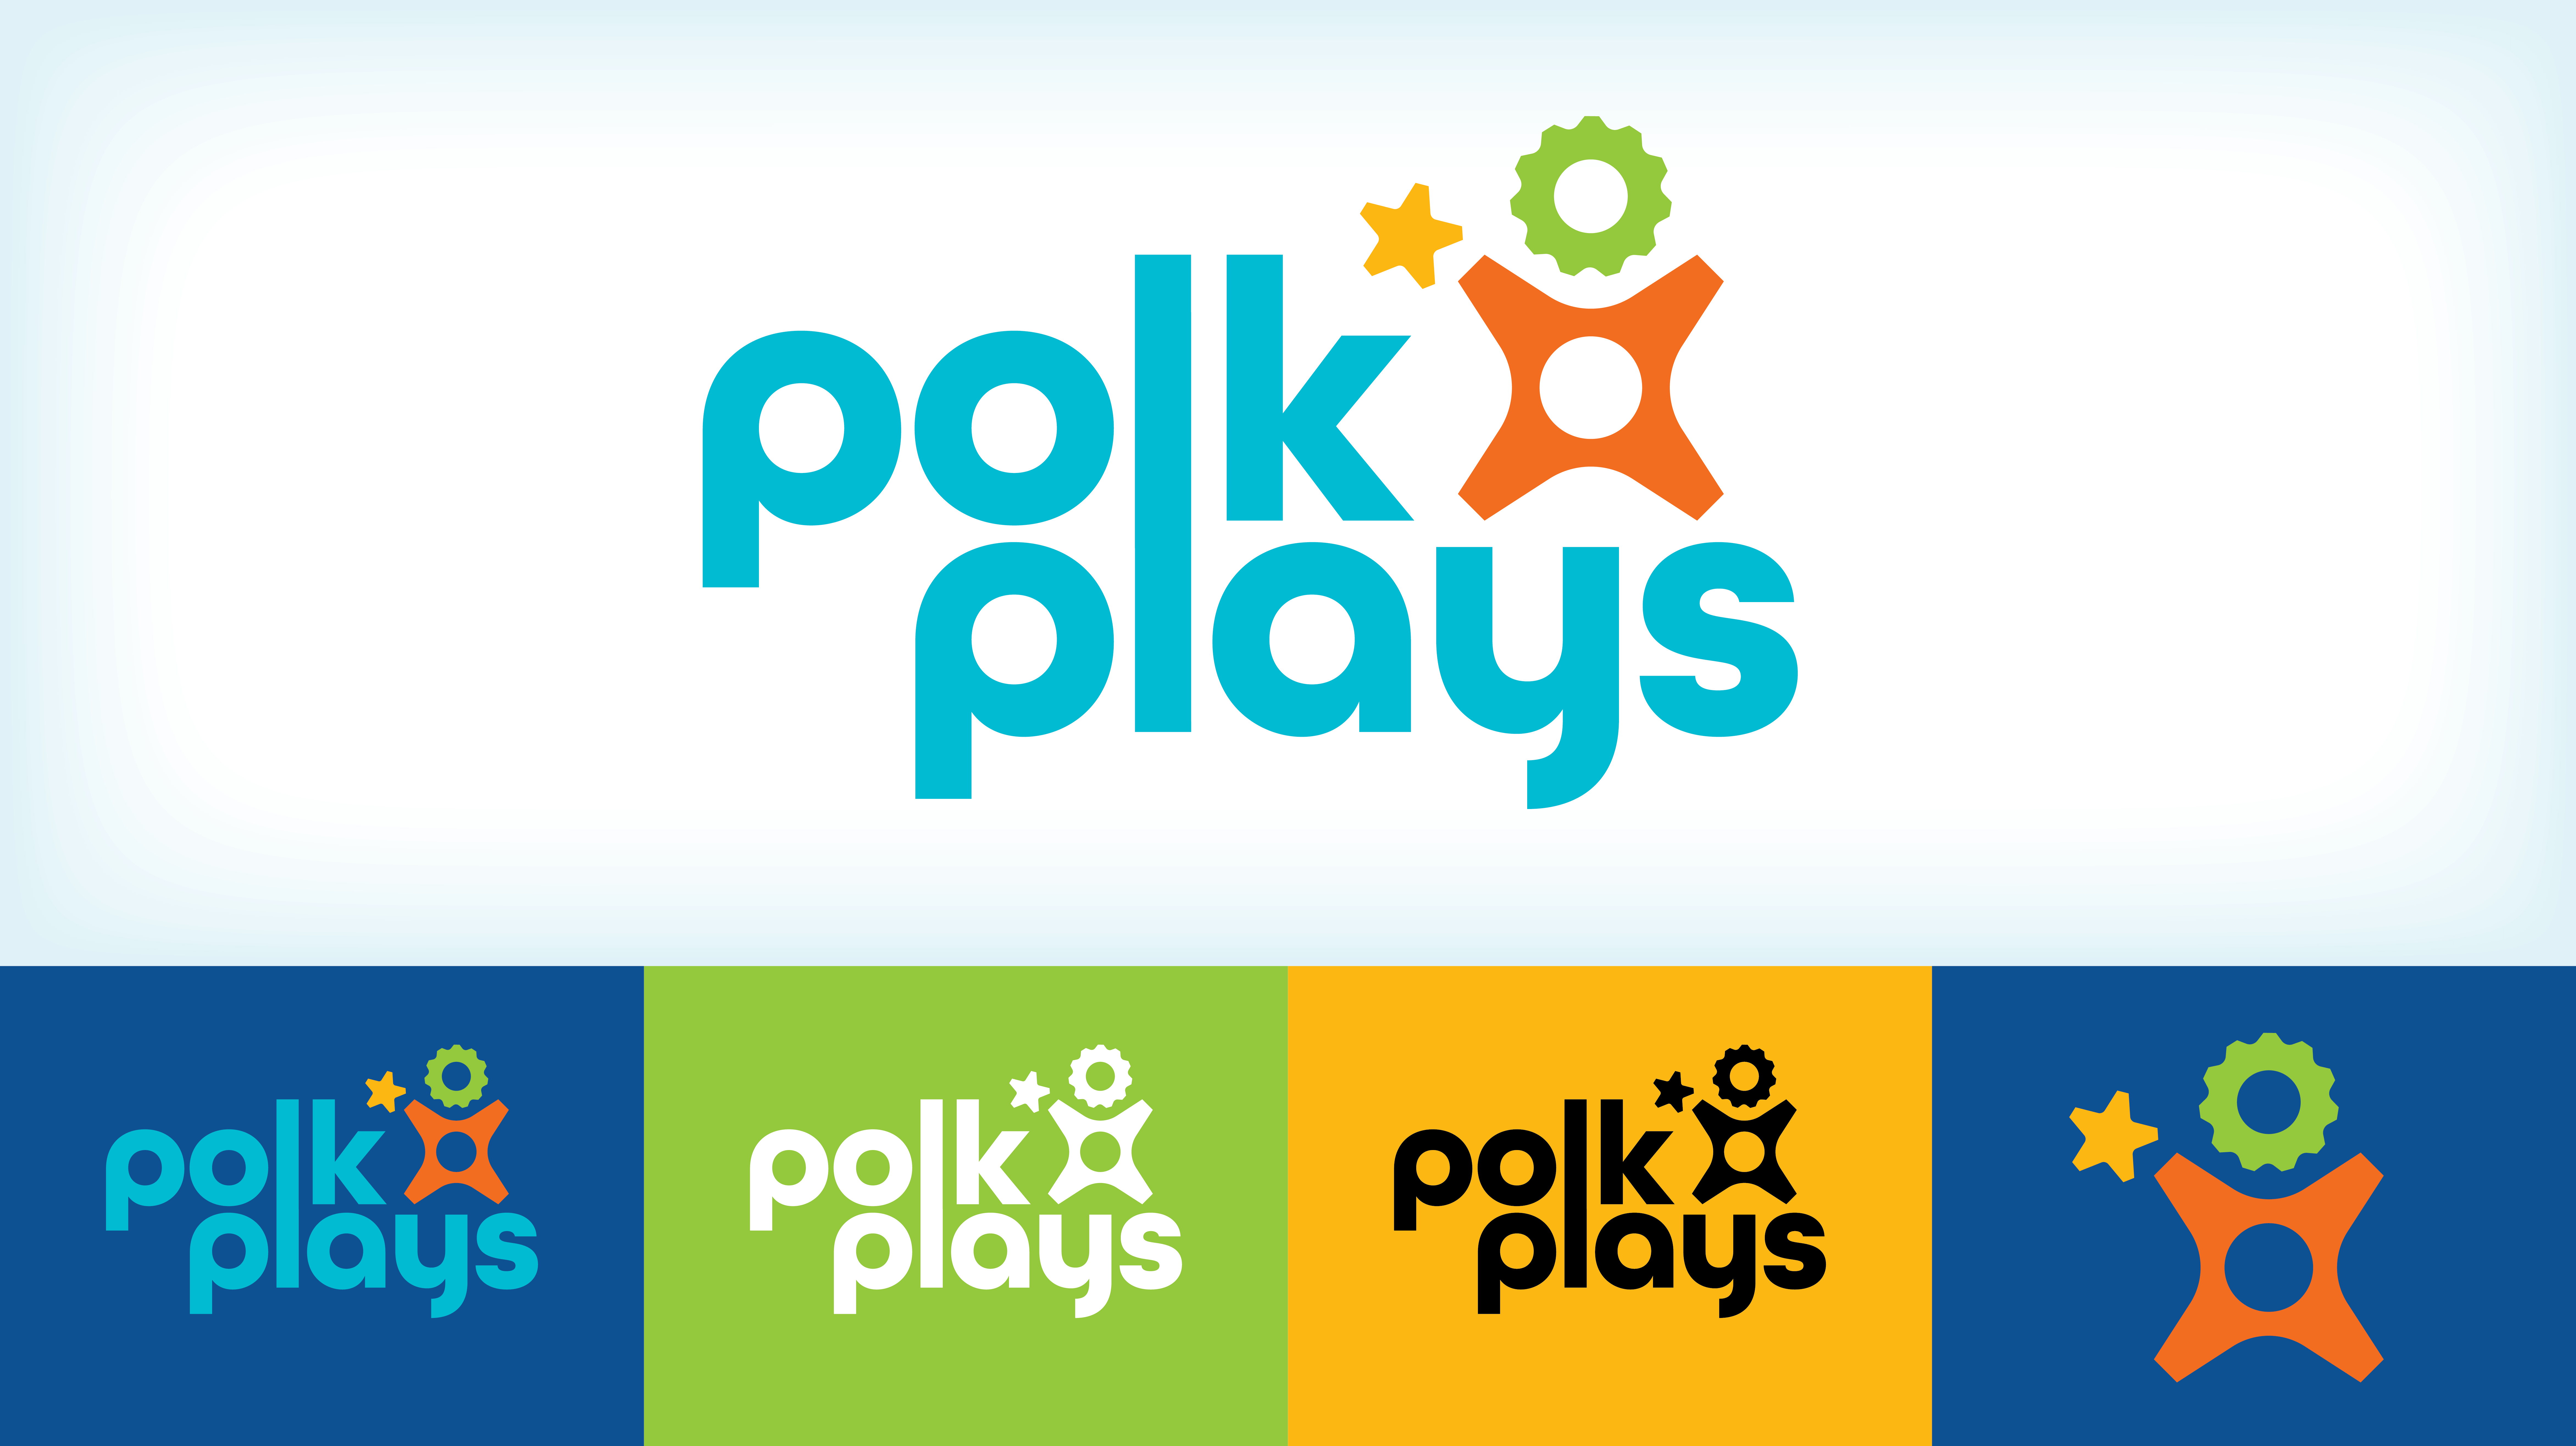 Polk Plays primary logo and logo color options